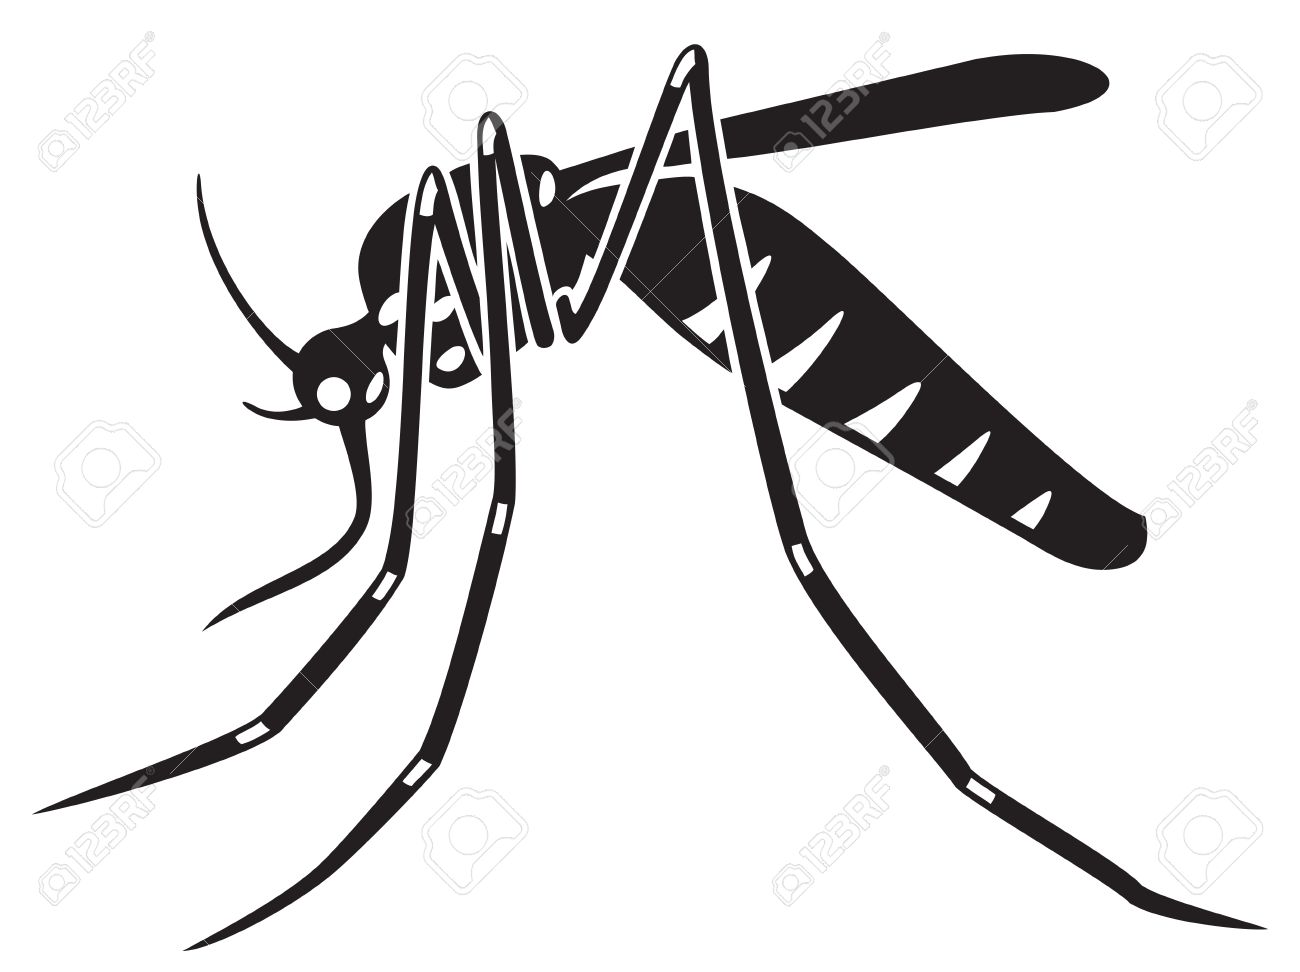 Mosquito clipart realistic. Free download best 